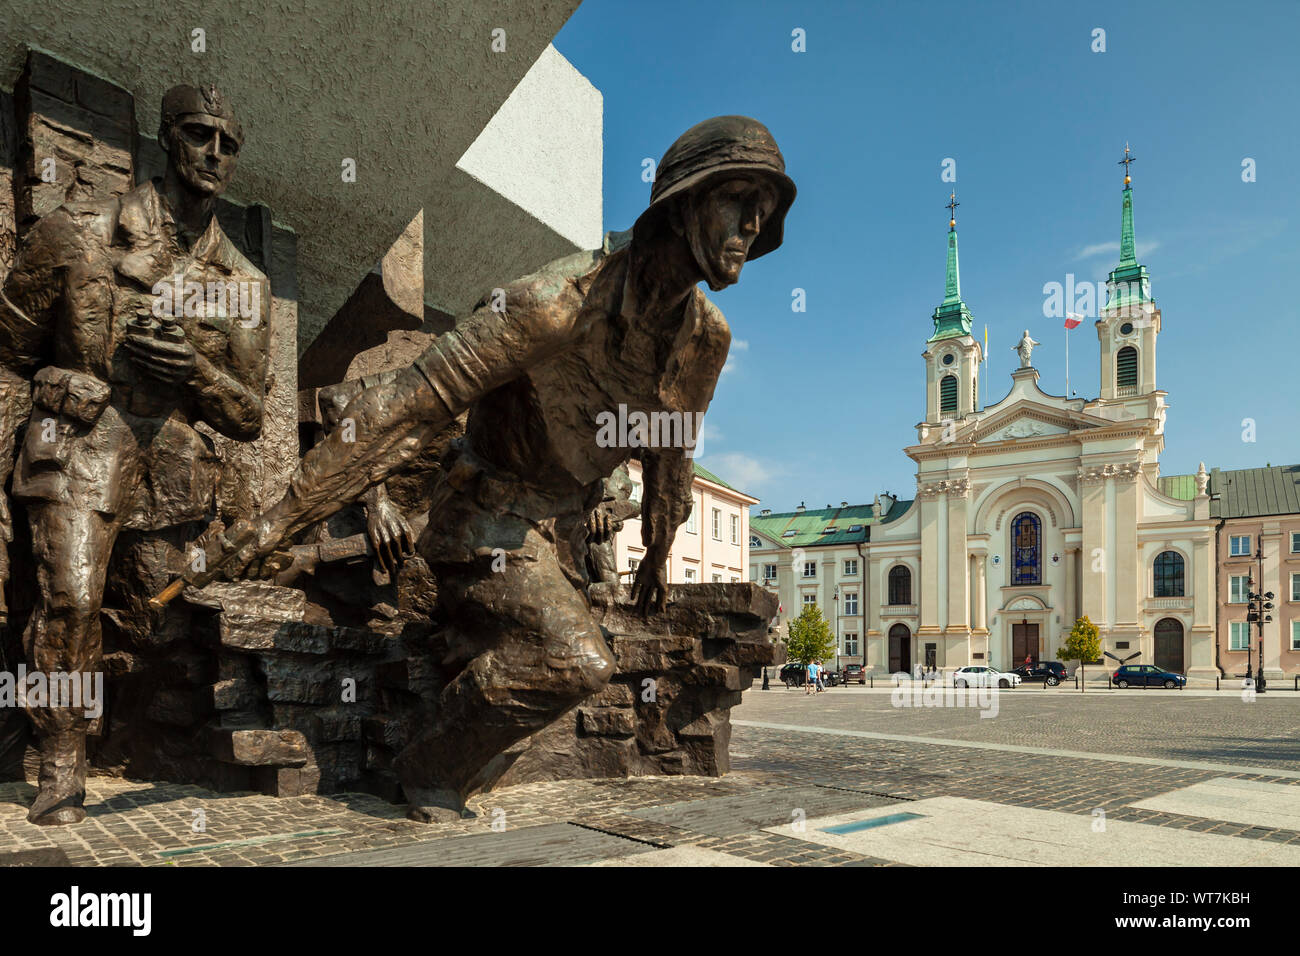 Summer afternoon at the Warsaw Uprising monument, Warsaw, Poland. Stock Photo